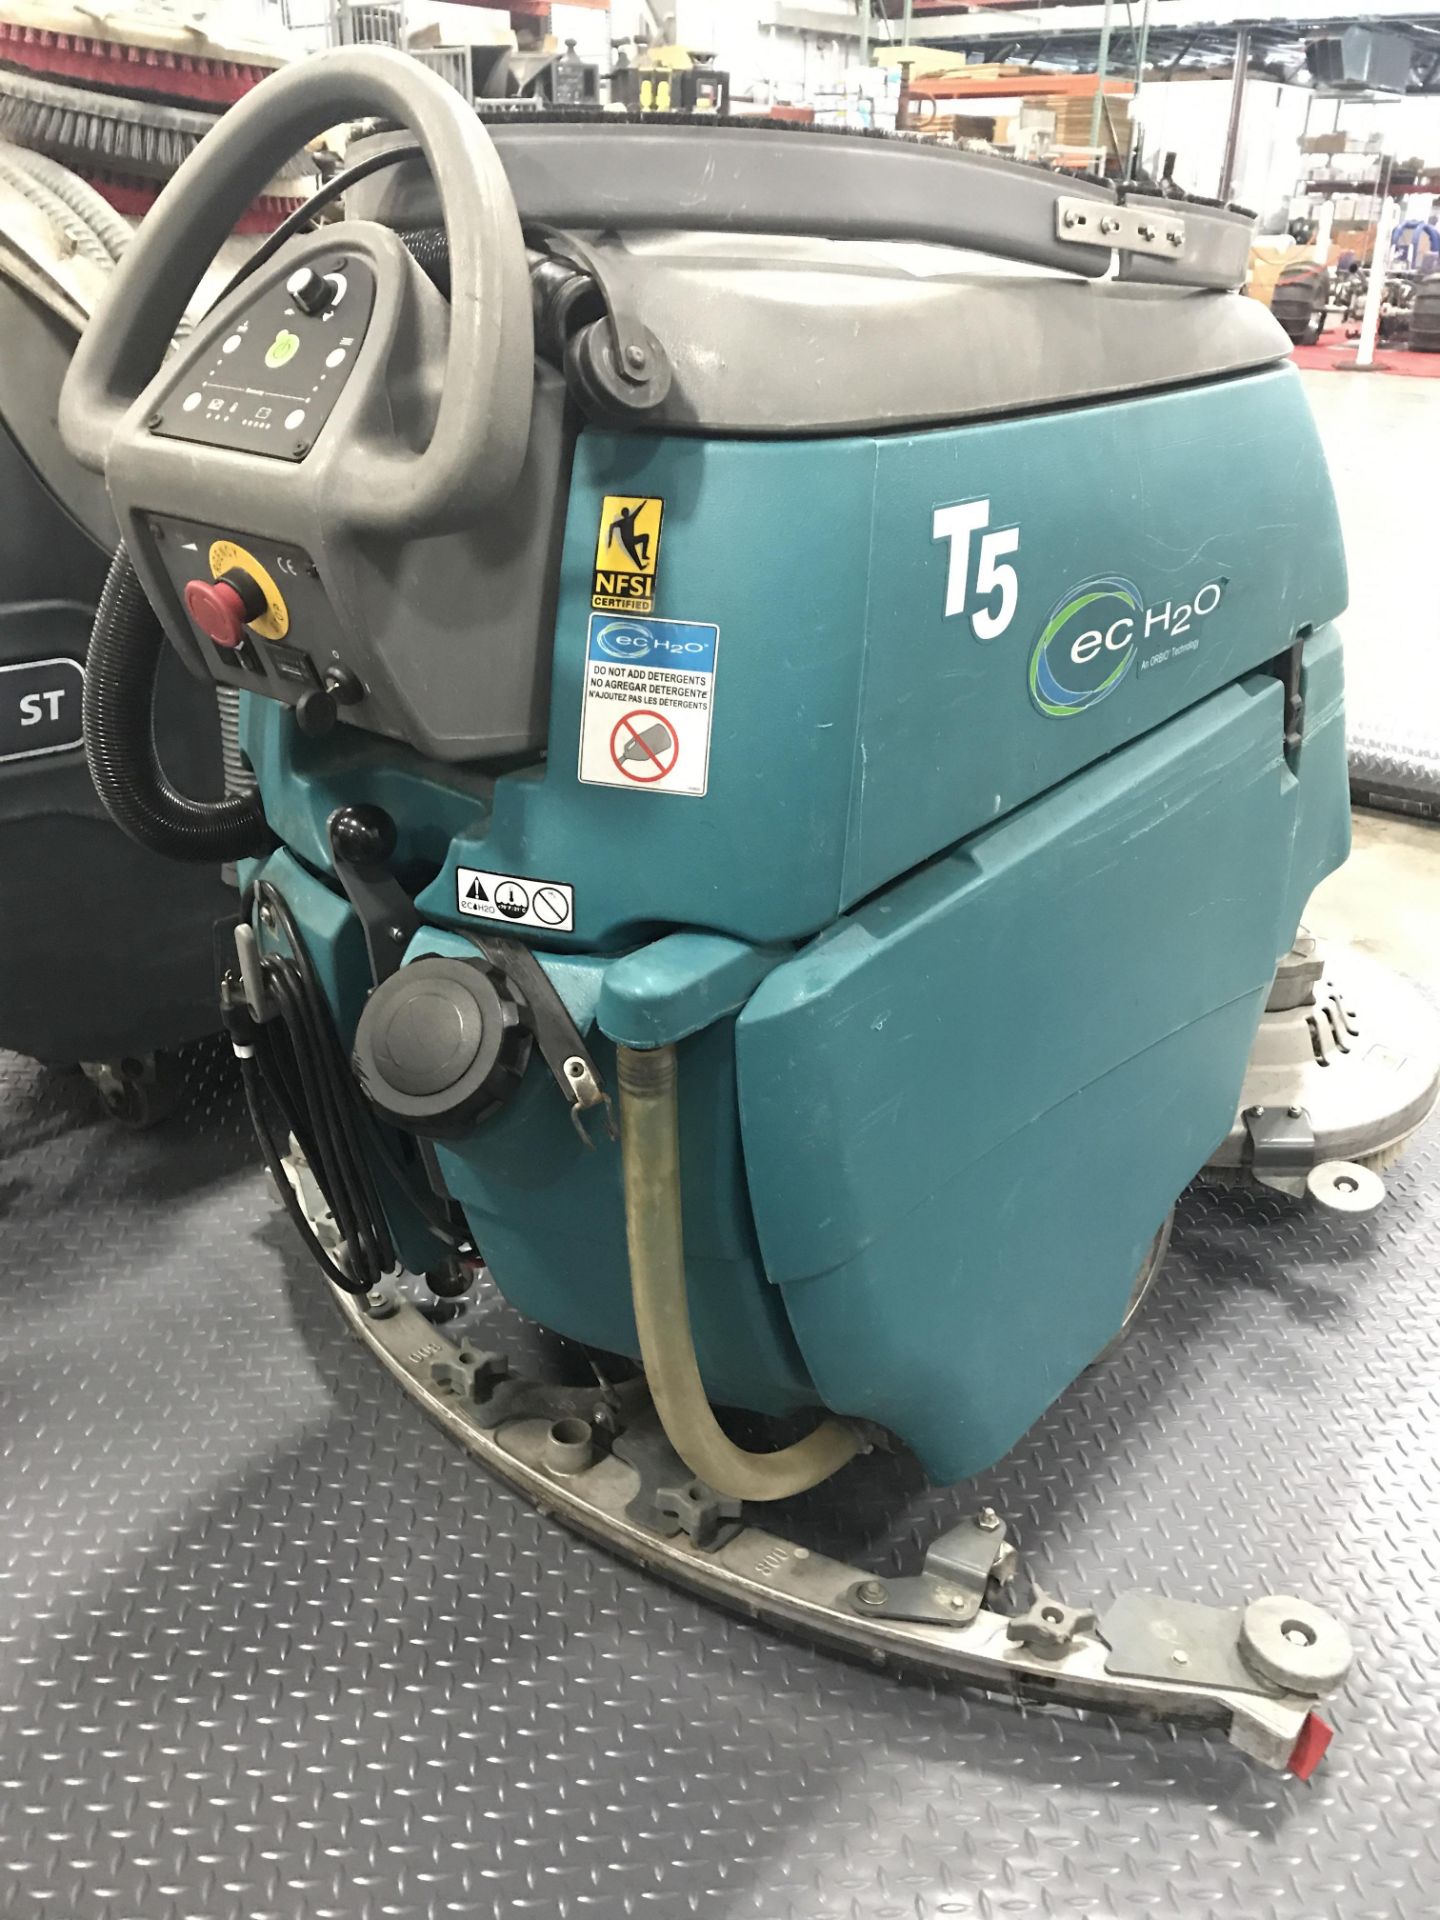 TENNANT T5 FLOOR SWEEPER/SCRUBBER, ECO H20, 780 HOURS SHOWING. - Image 3 of 8